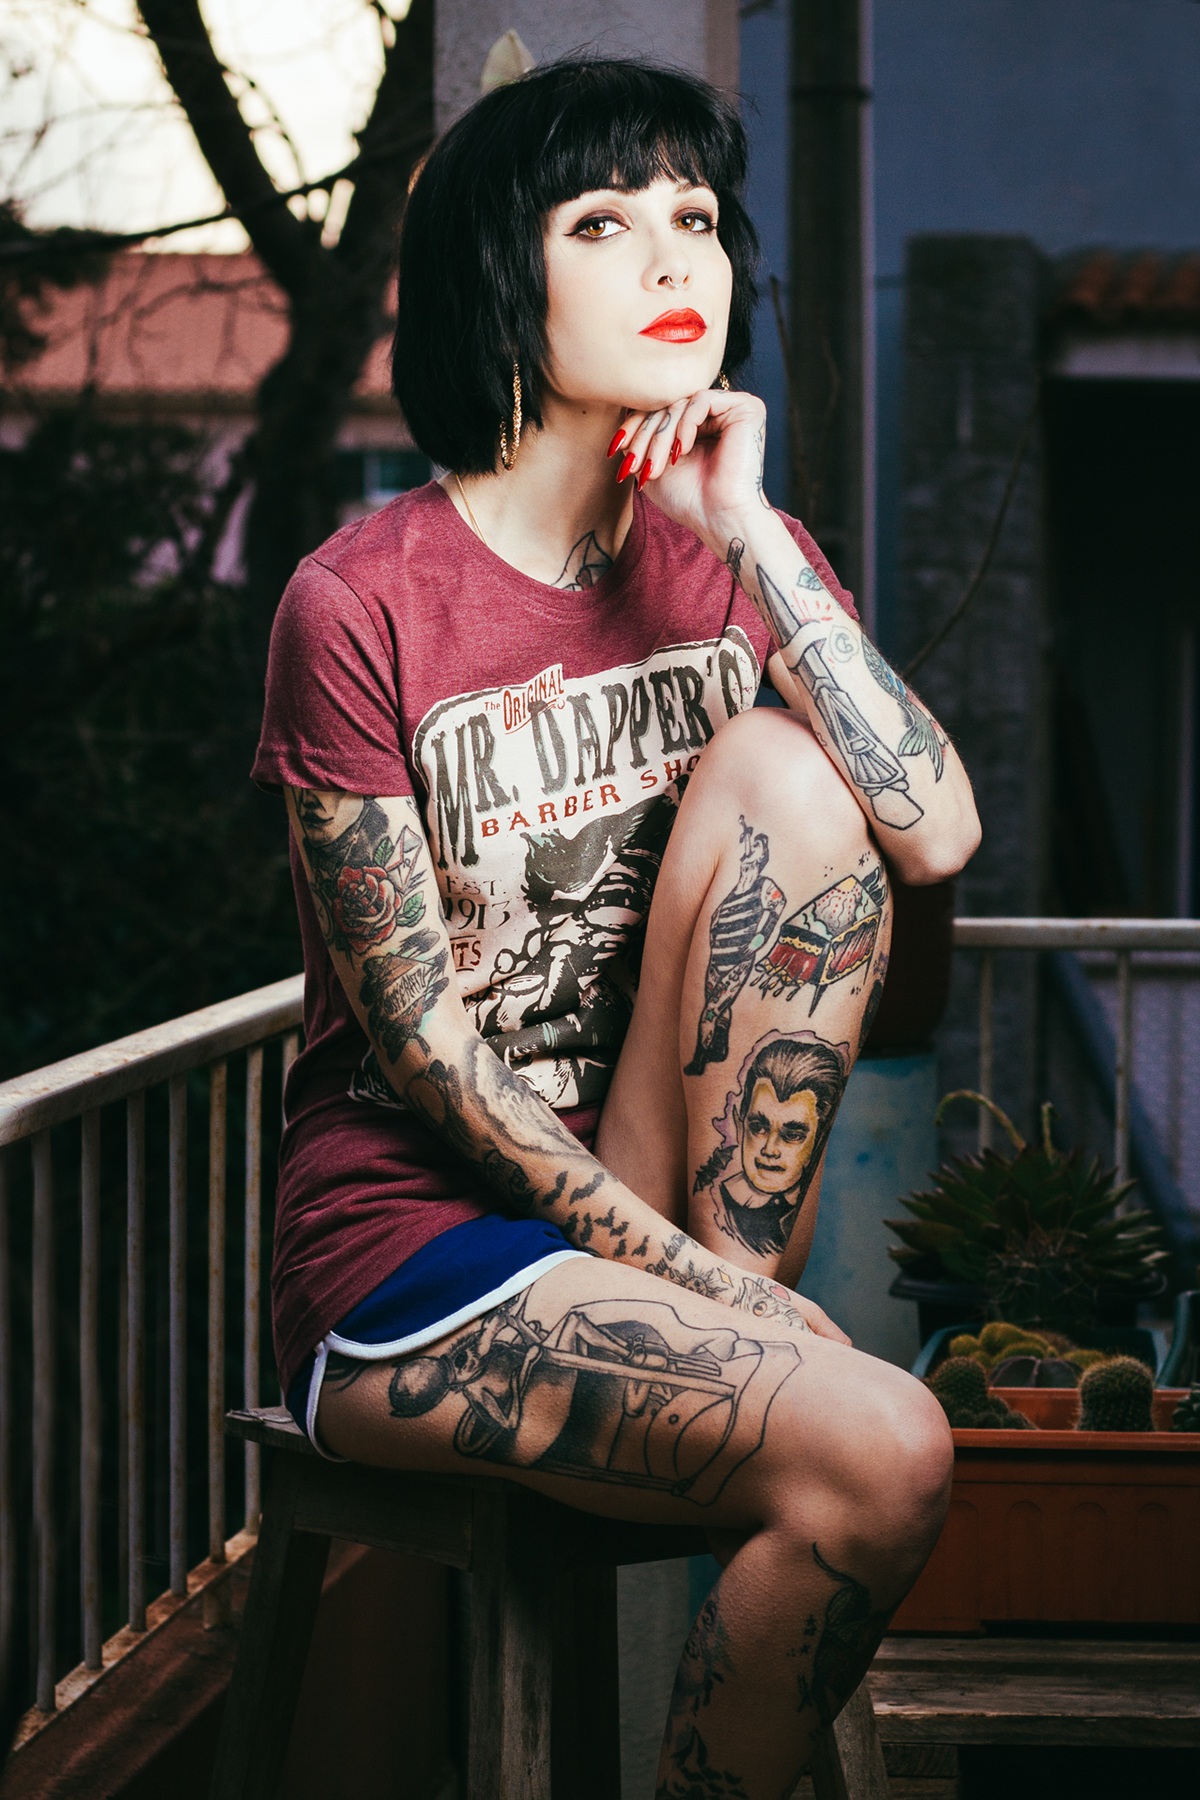 ink editorial tattoos teens Young Lisbon light magazine design TravellInk passion life